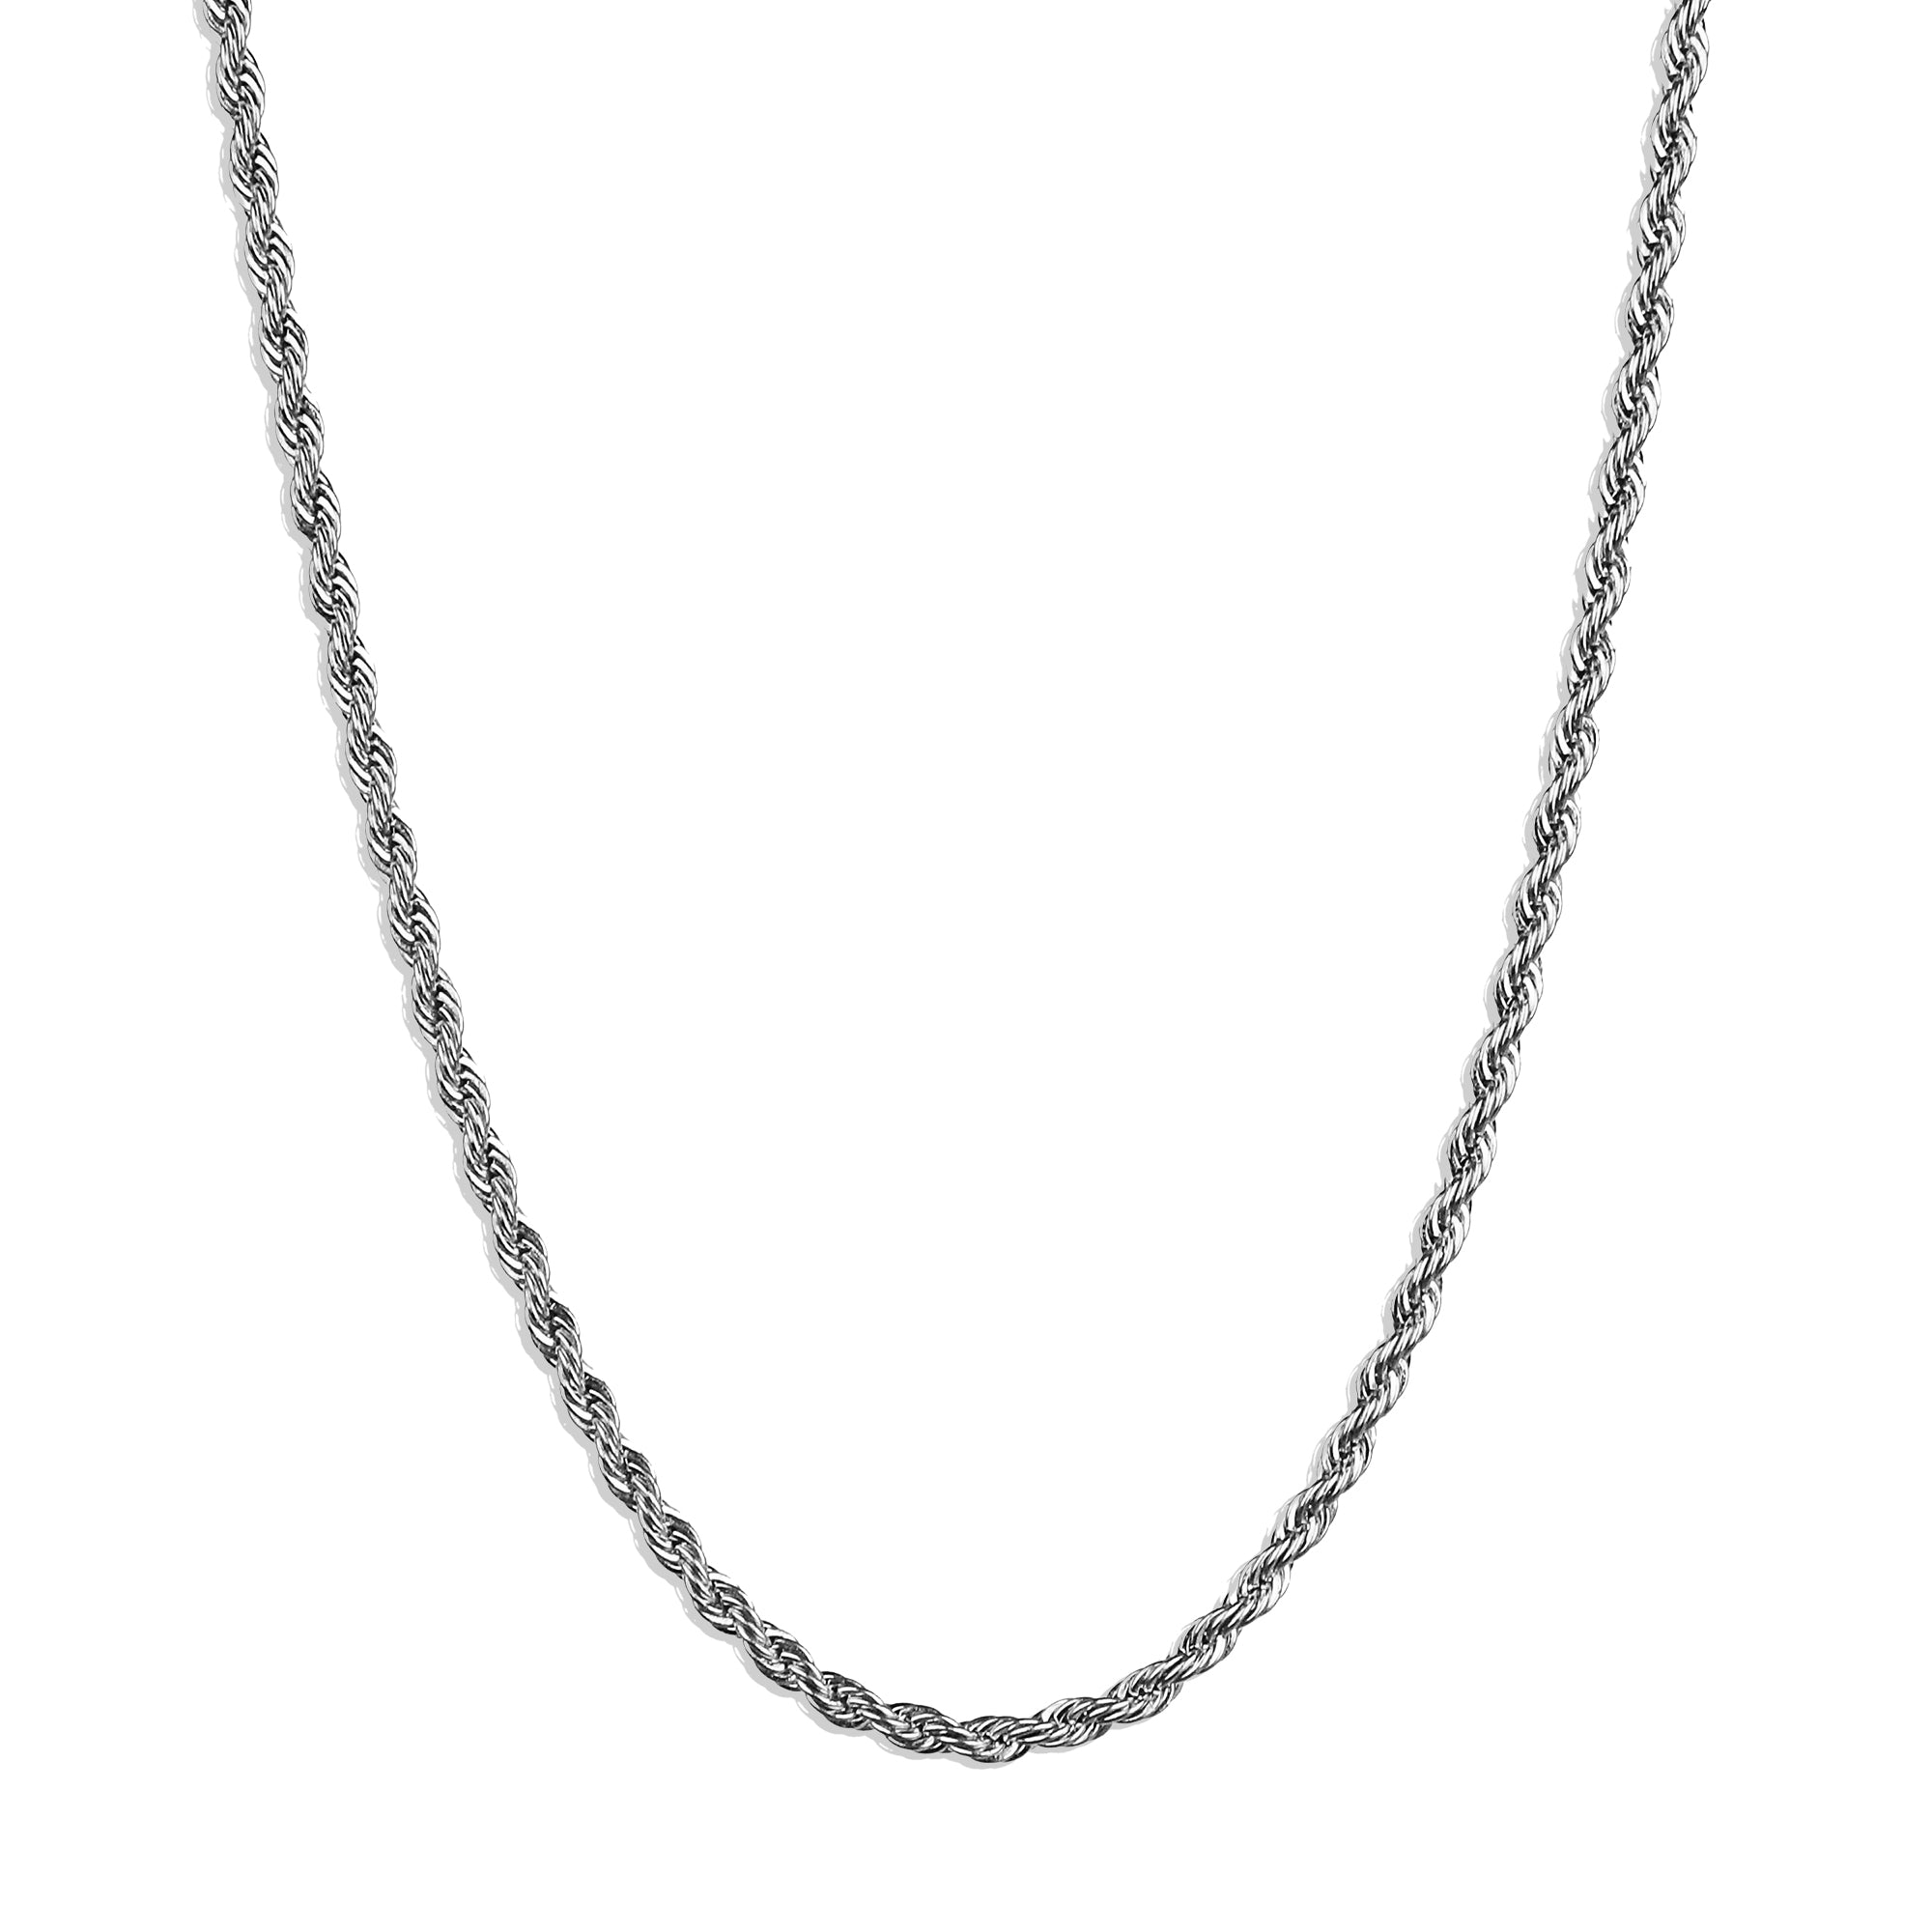 Rope Chain Necklace - Silver 2.5mm